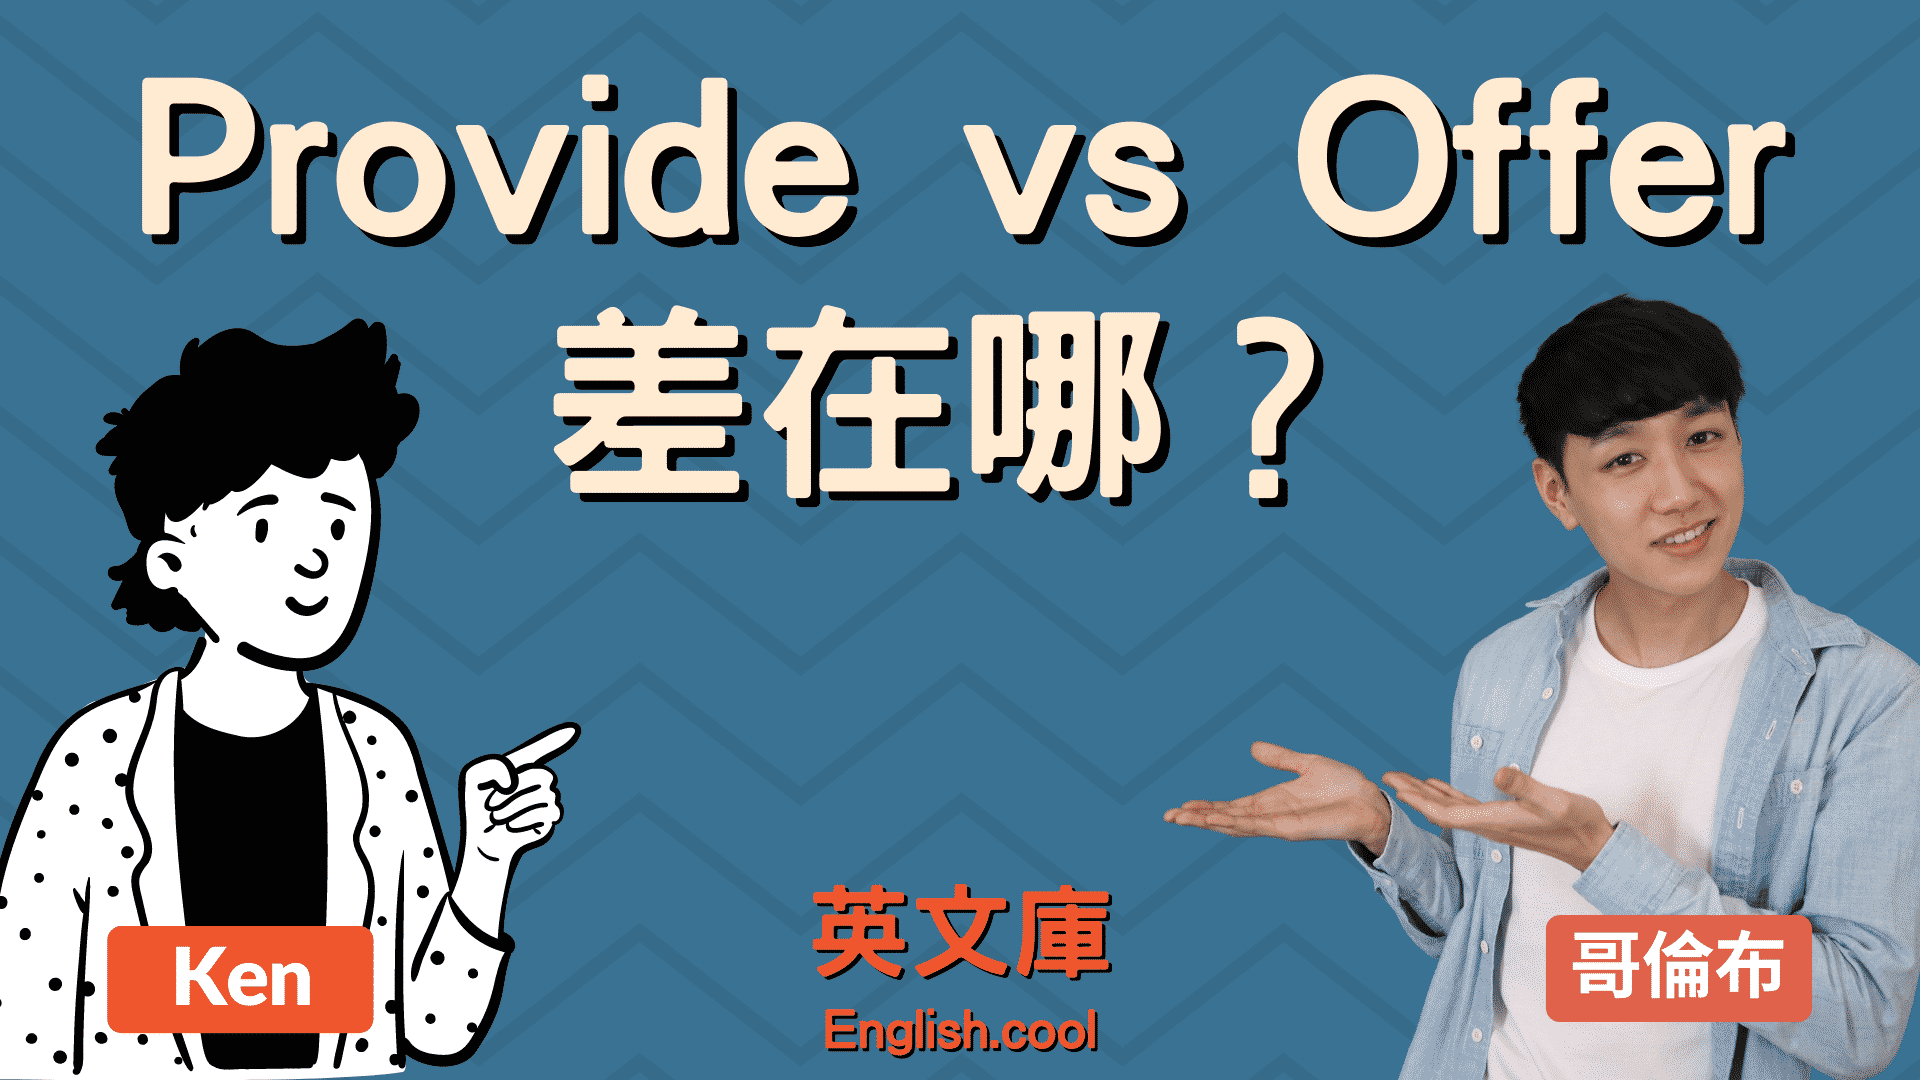 You are currently viewing 「provide」正確用法是？跟offer差在哪？